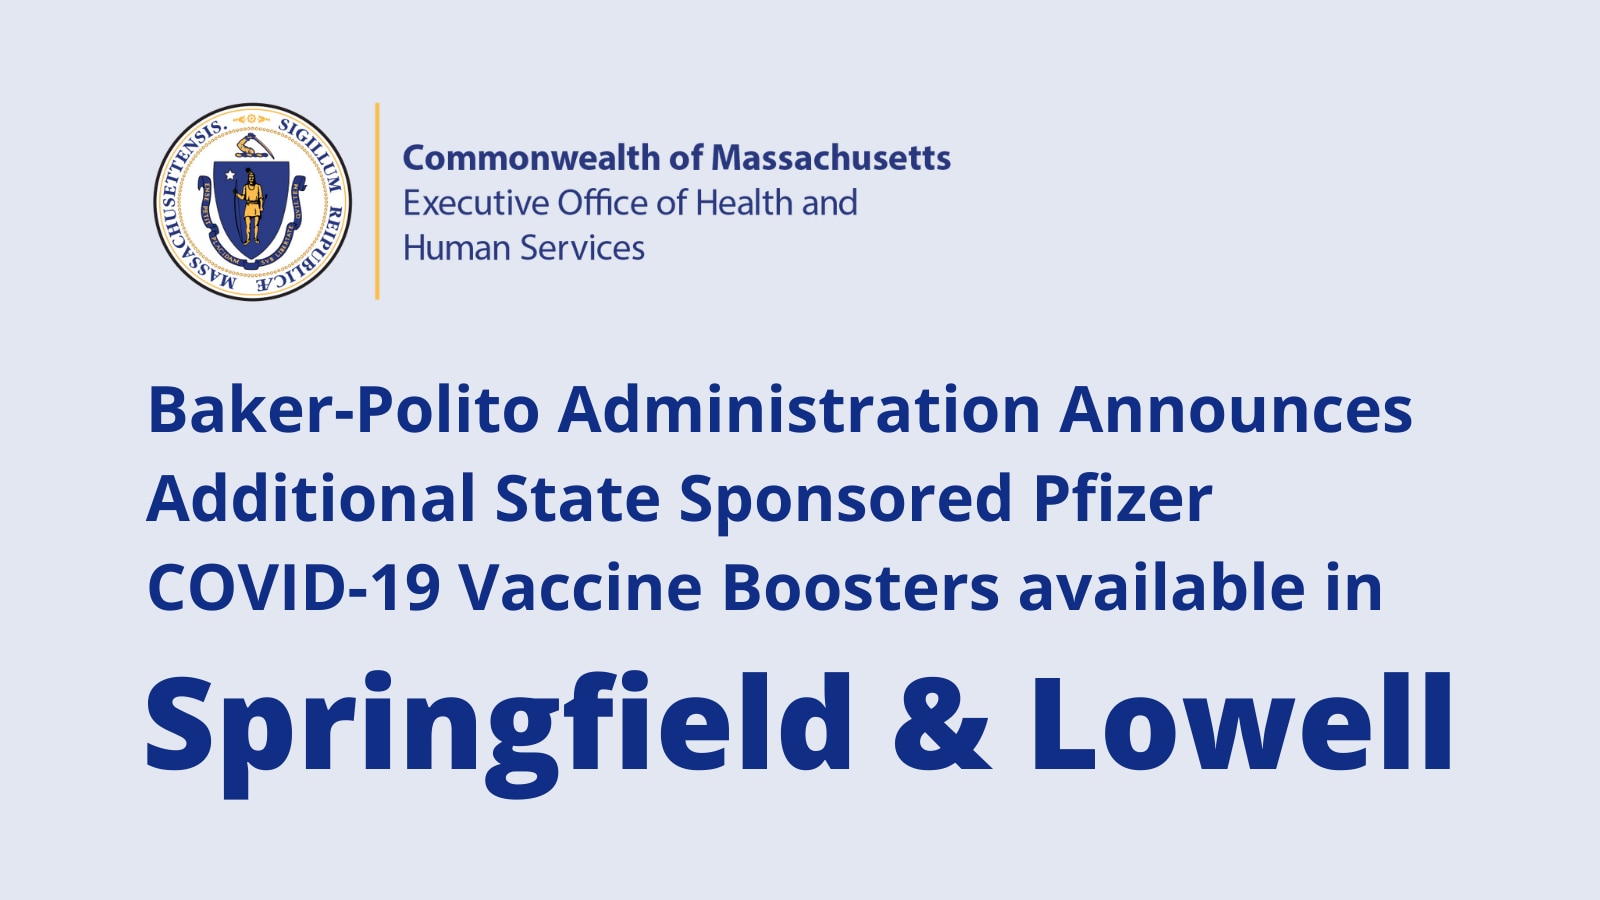 Baker-Polito Administration Announces Additional COVID-19 Booster Sites Additional state sponsored Pfizer COVID-19 Vaccine Boosters available in Springfield, Lowell